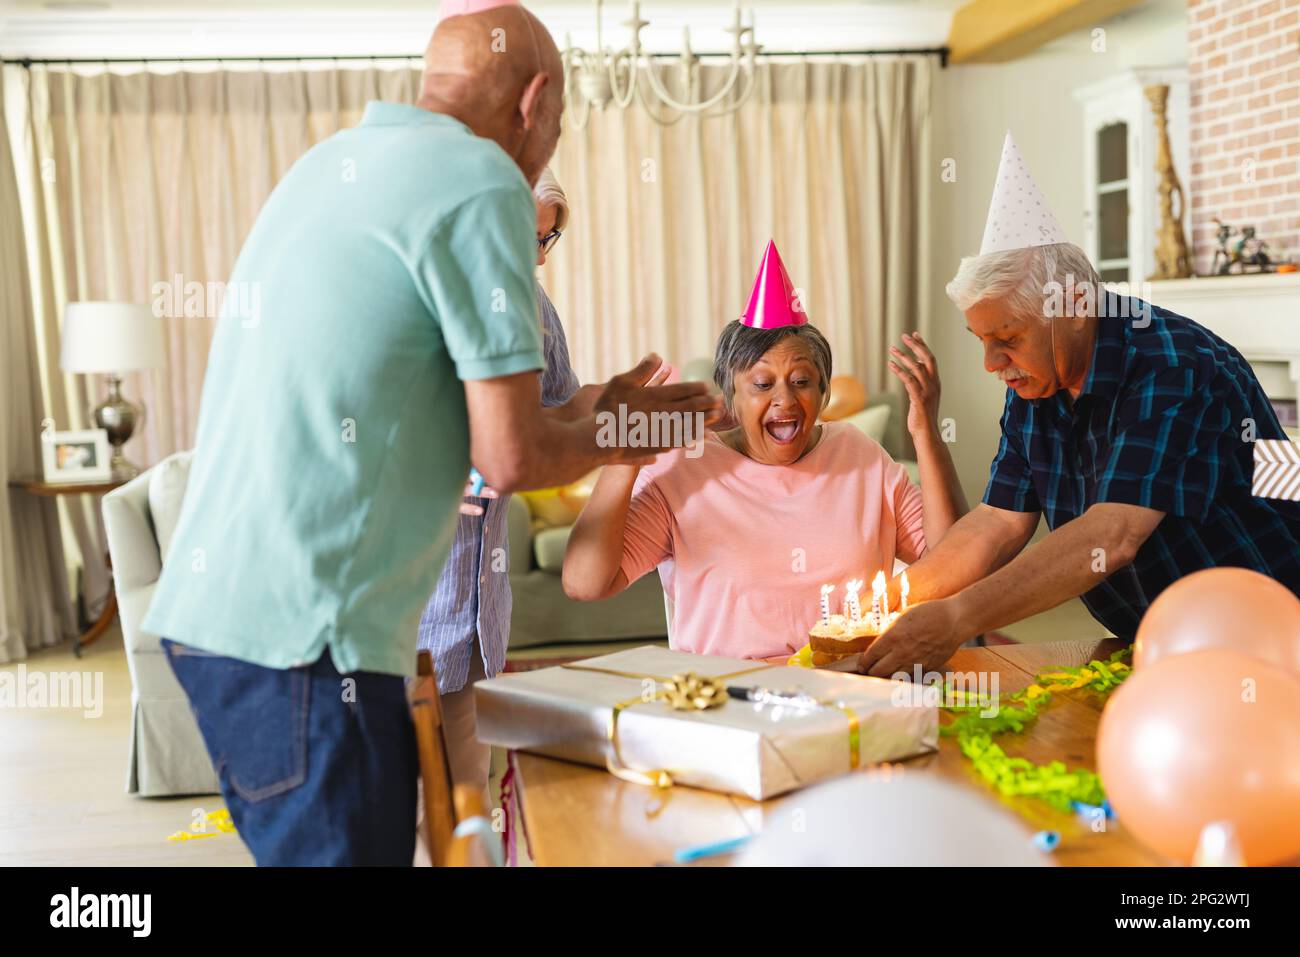 Happy group of diverse senior friends celebrating birthday with cake and presents Stock Photo